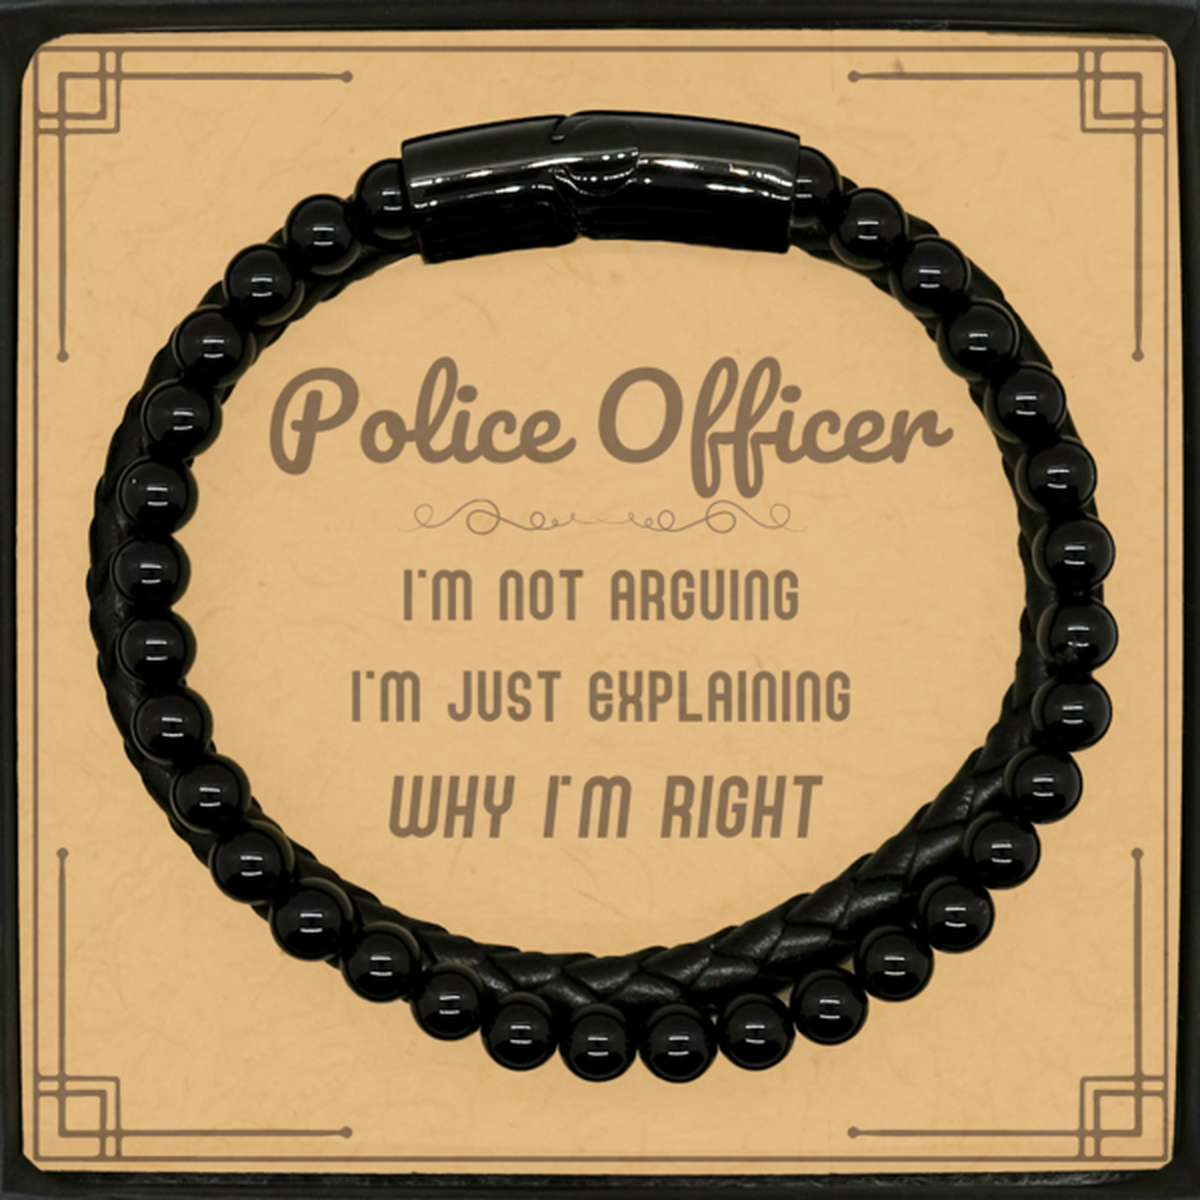 Police Officer I'm not Arguing. I'm Just Explaining Why I'm RIGHT Stone Leather Bracelets, Funny Saying Quote Police Officer Gifts For Police Officer Message Card Graduation Birthday Christmas Gifts for Men Women Coworker